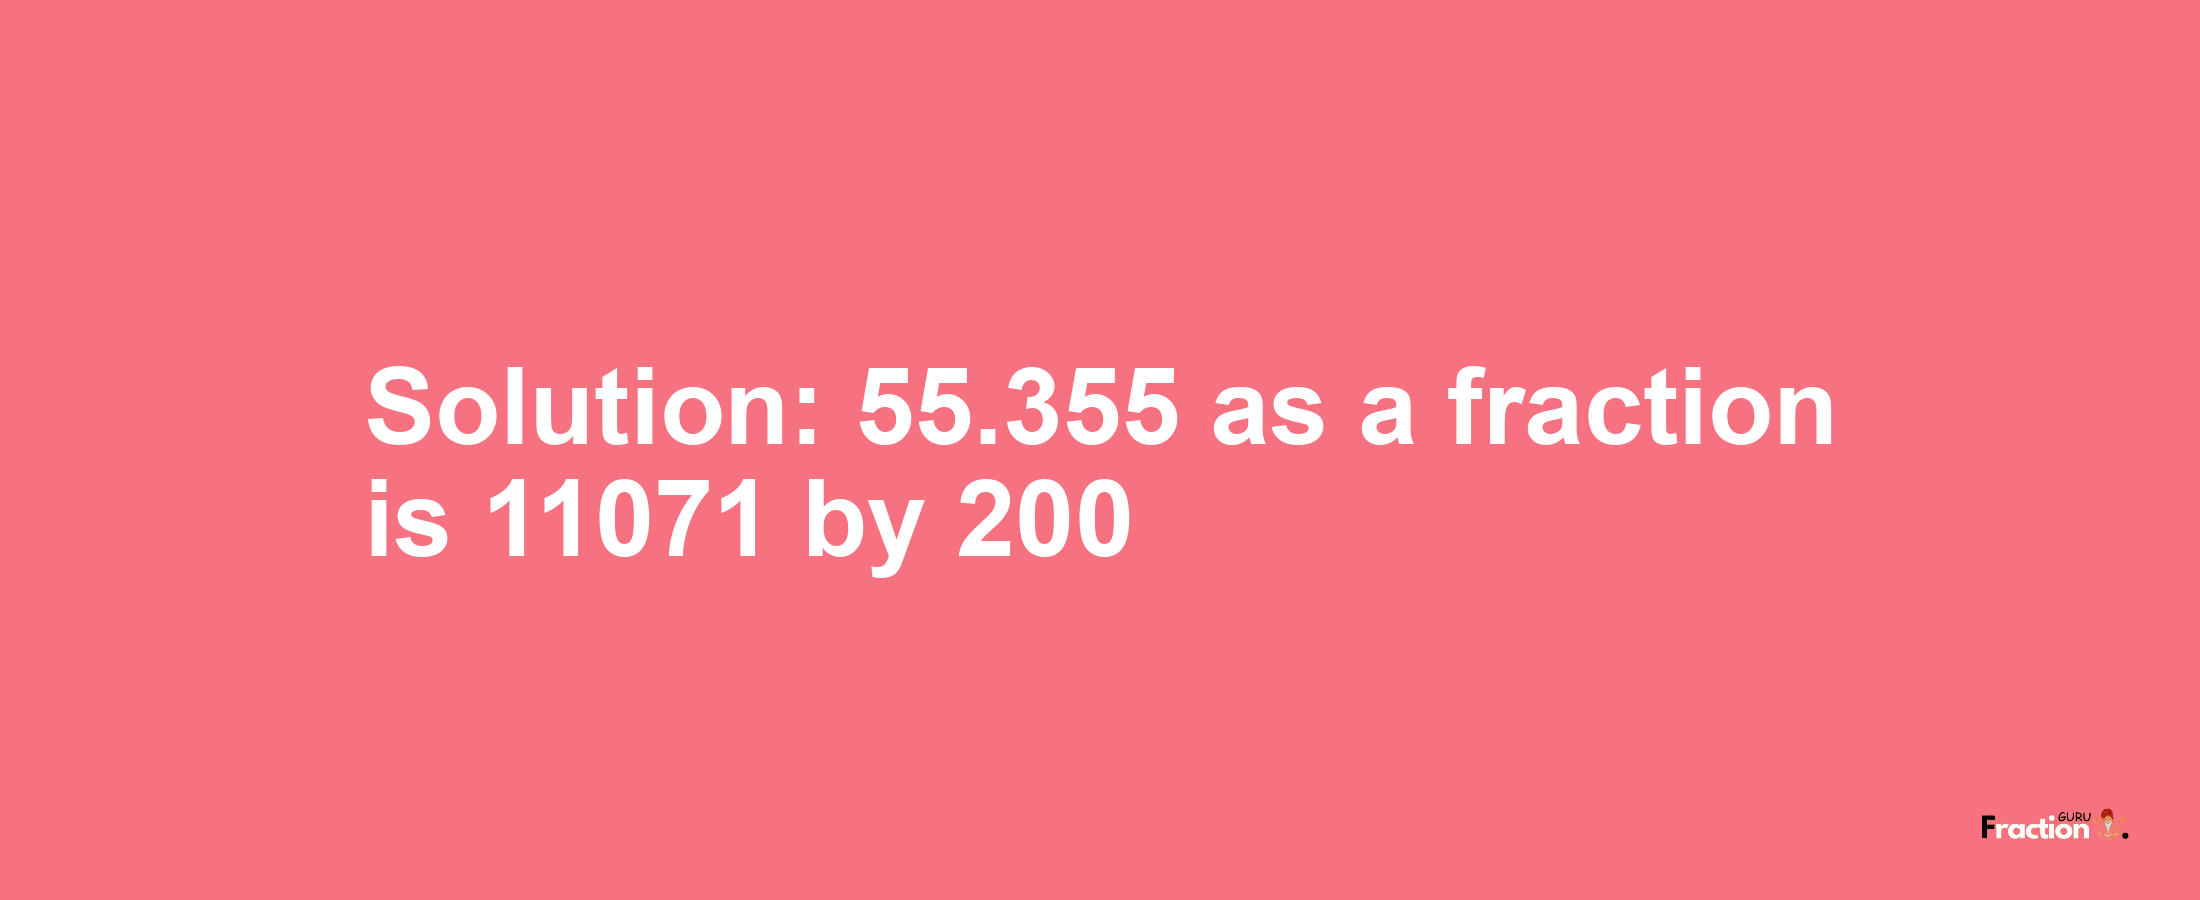 Solution:55.355 as a fraction is 11071/200